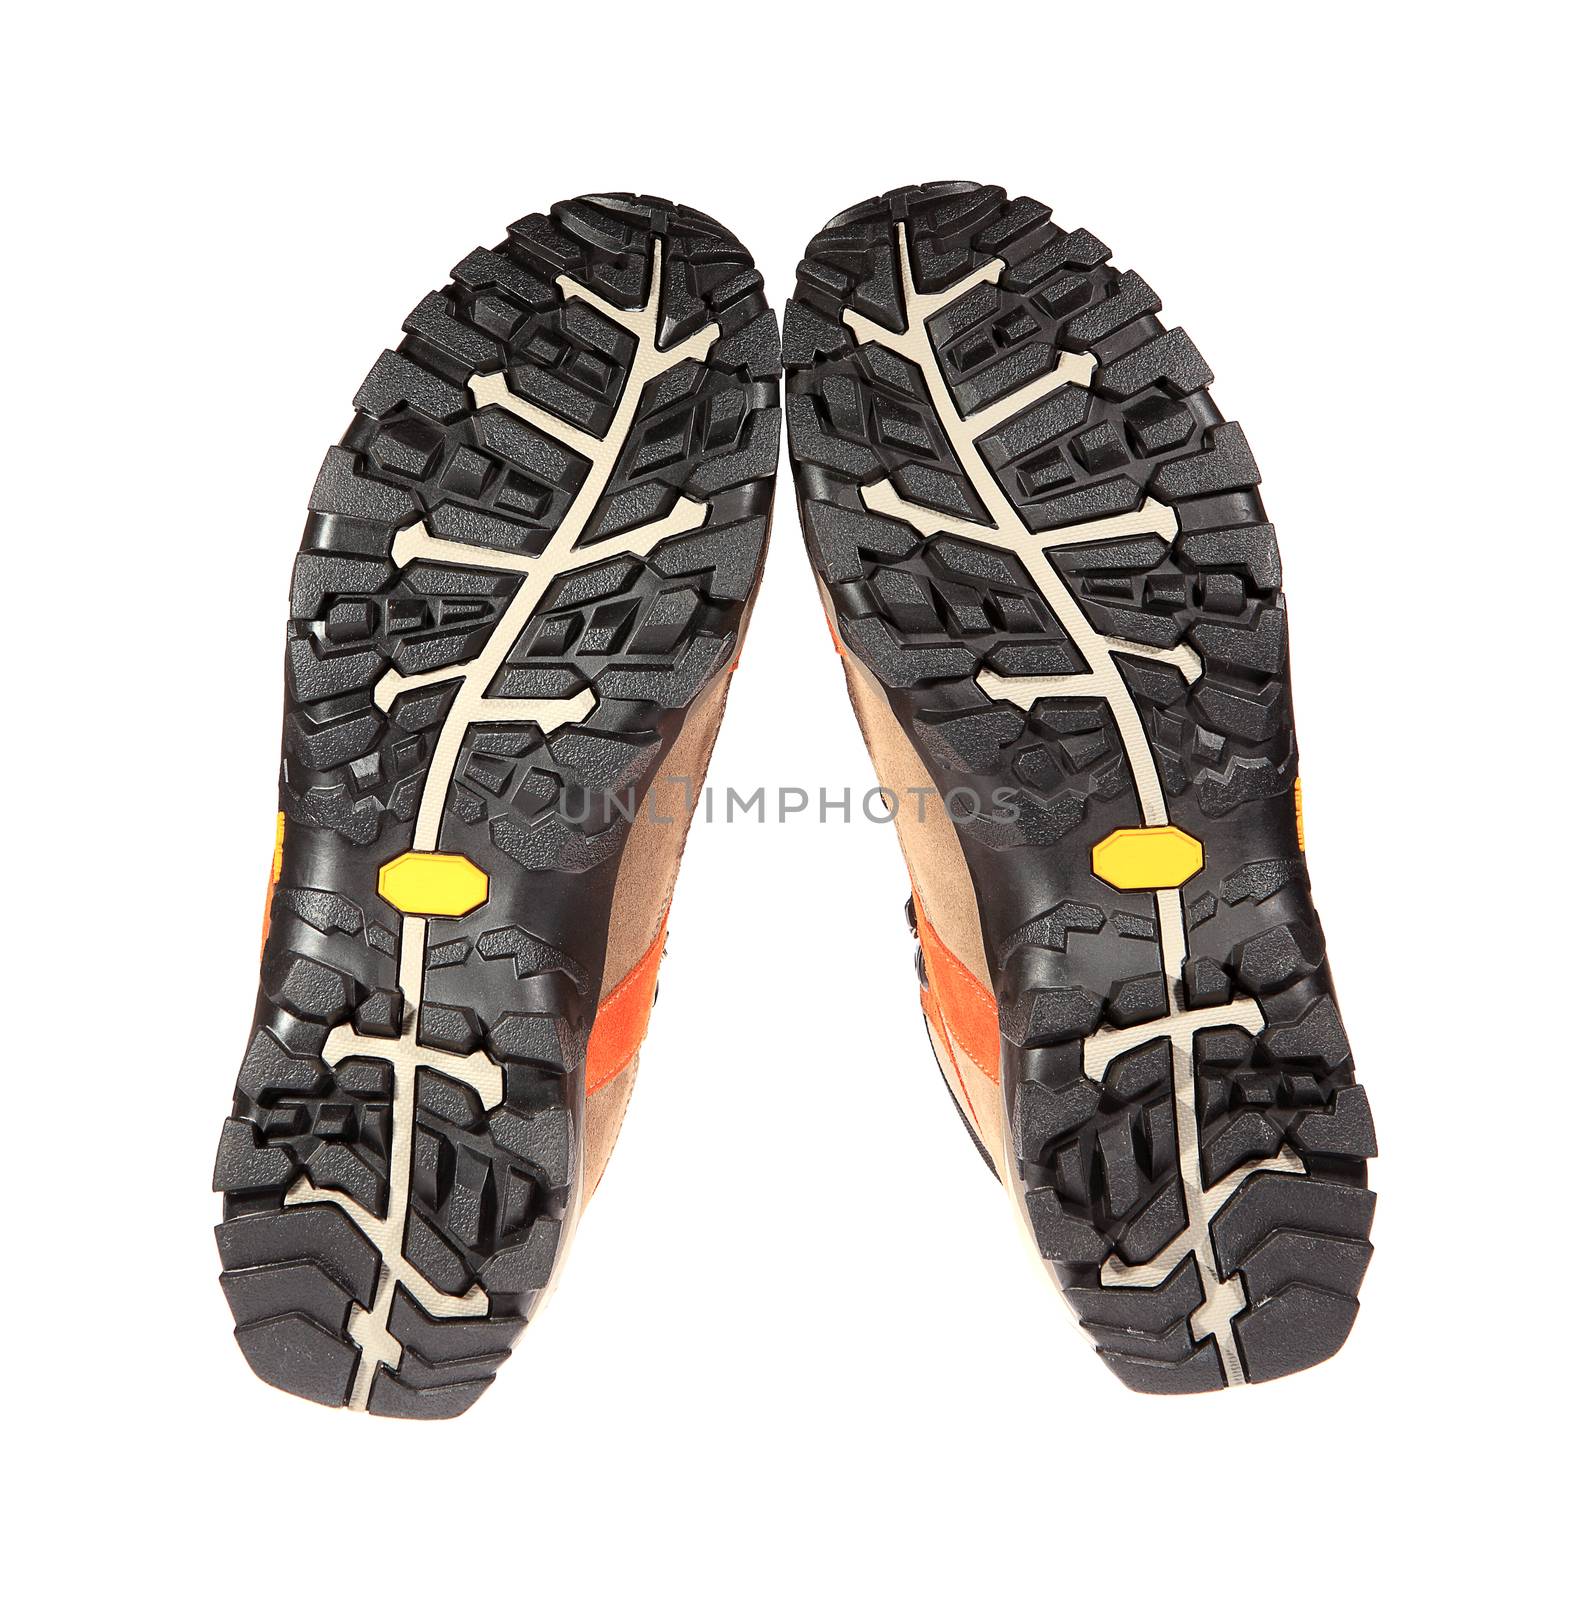 New track sole shoes on a white background, isolated